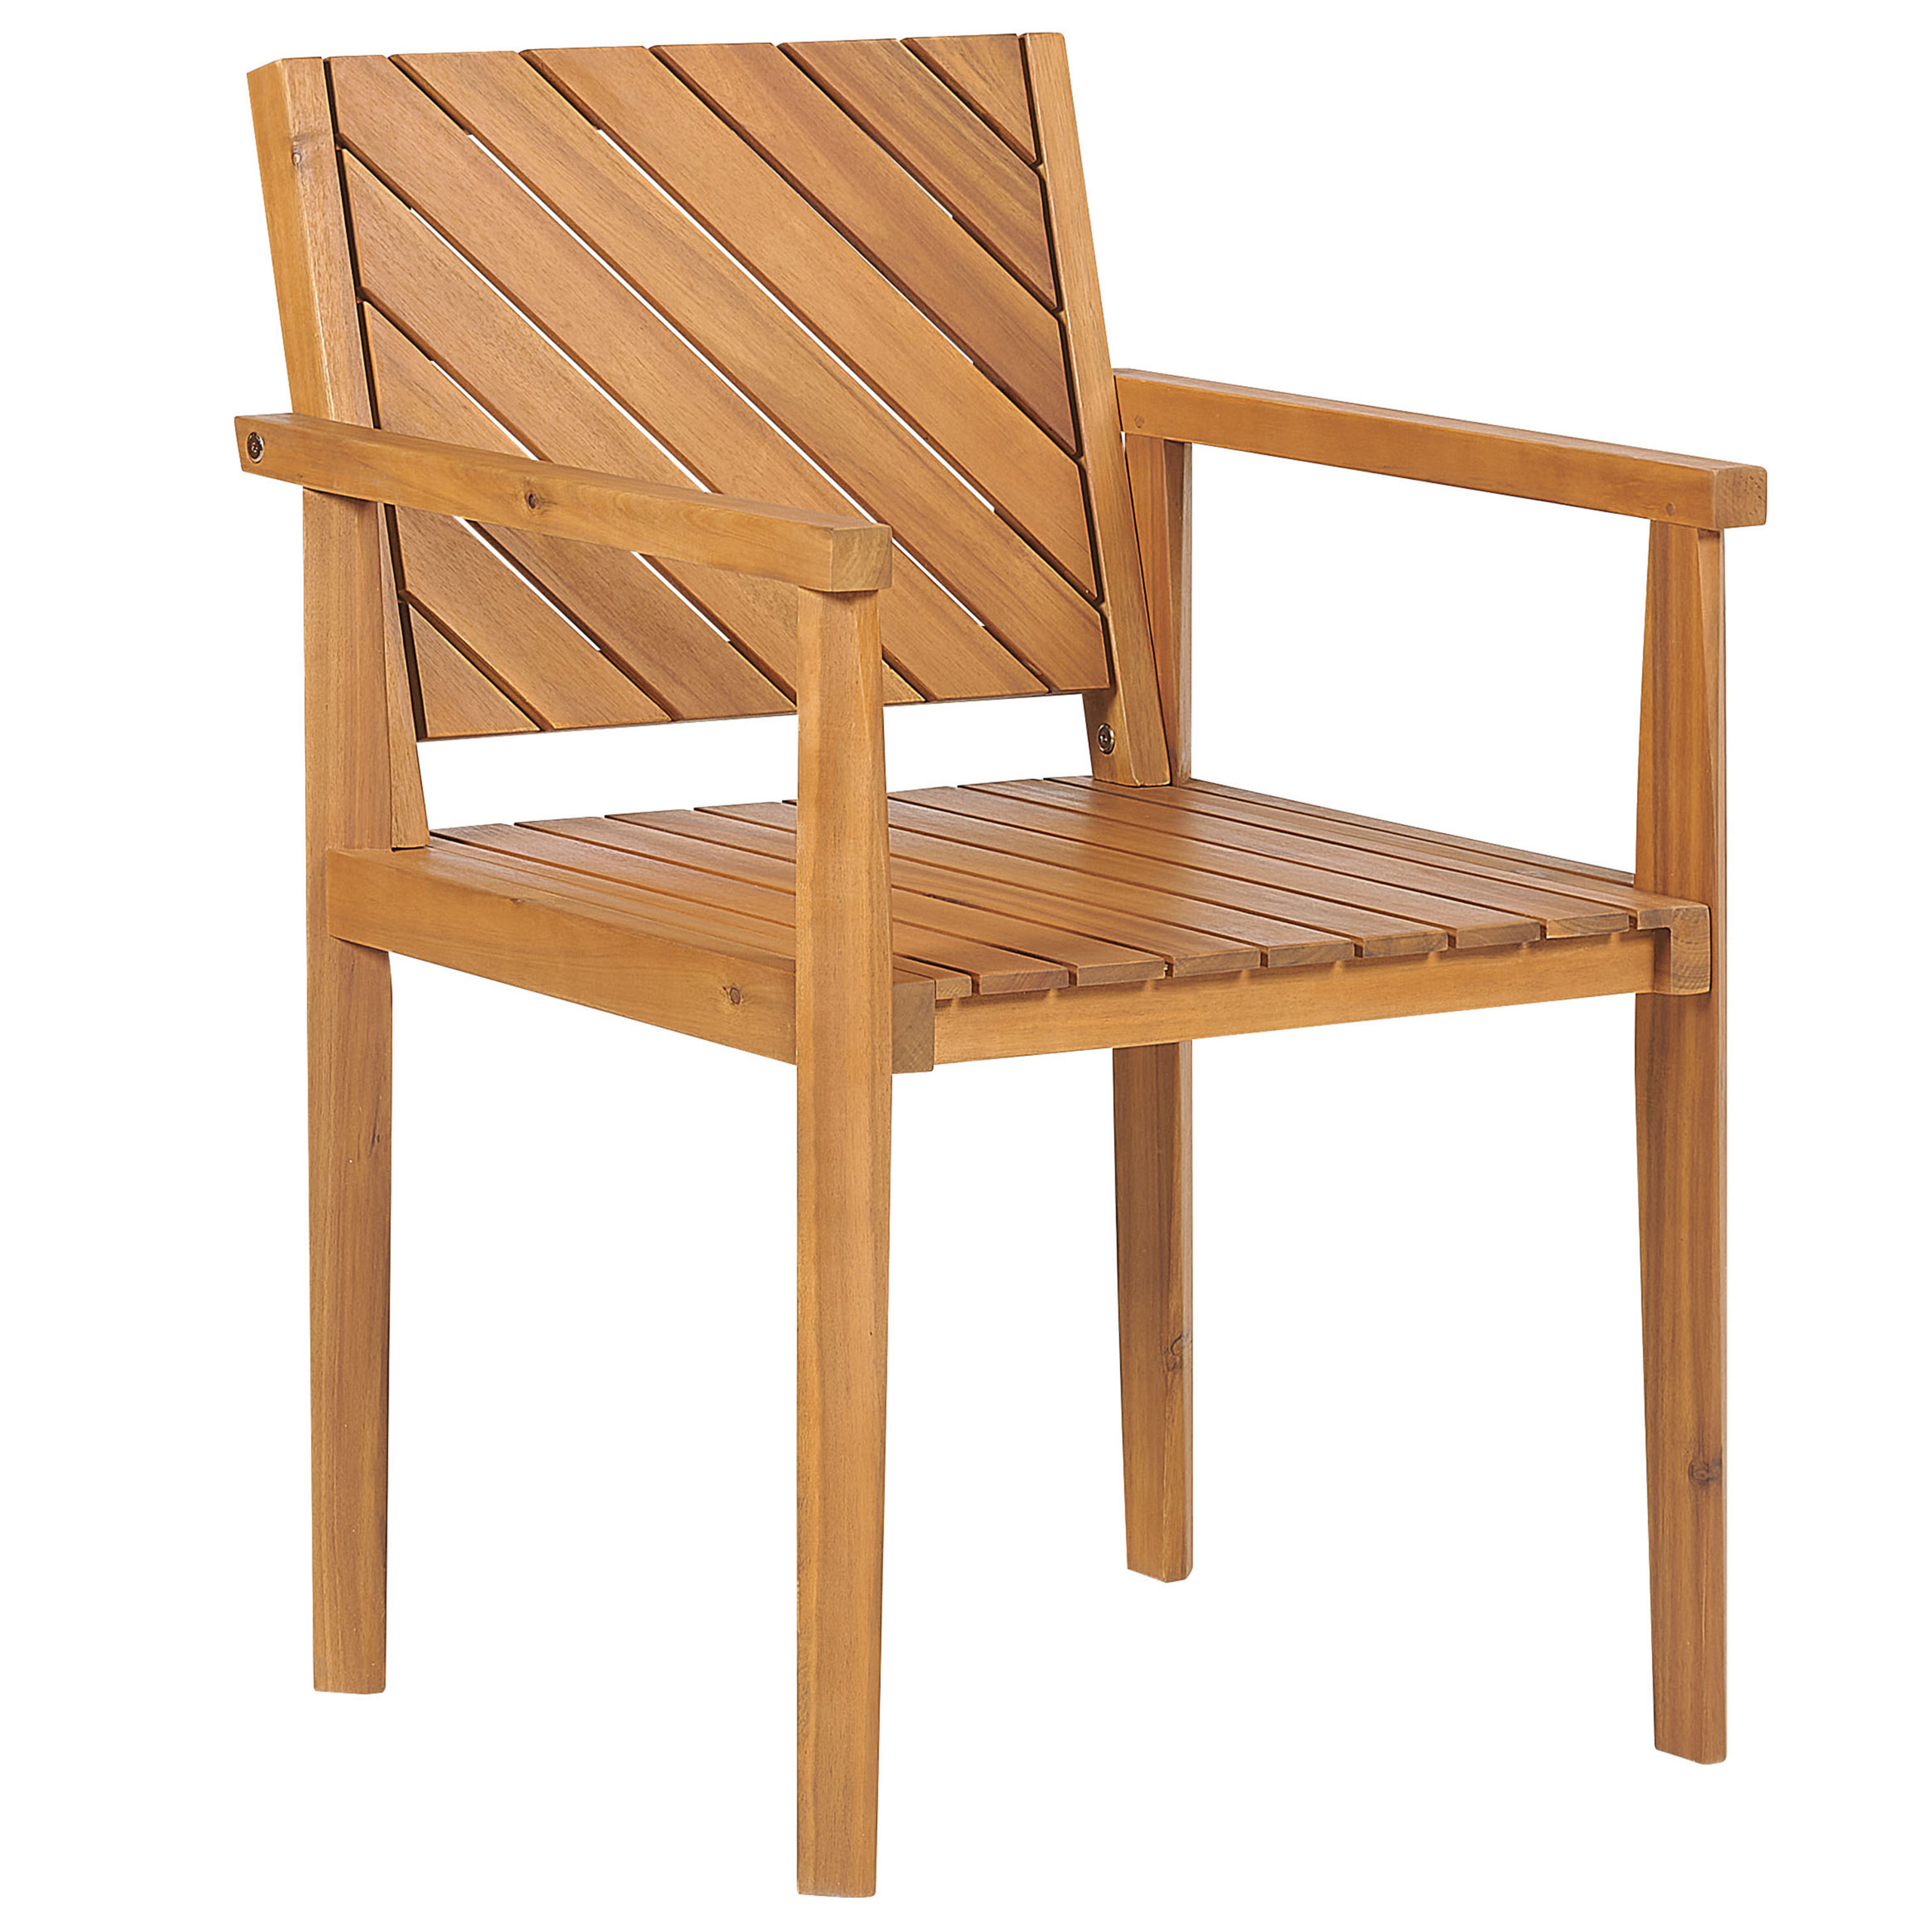 Traditional Garden Meal Chair with Wooden Armrests by Acacia Baratti-